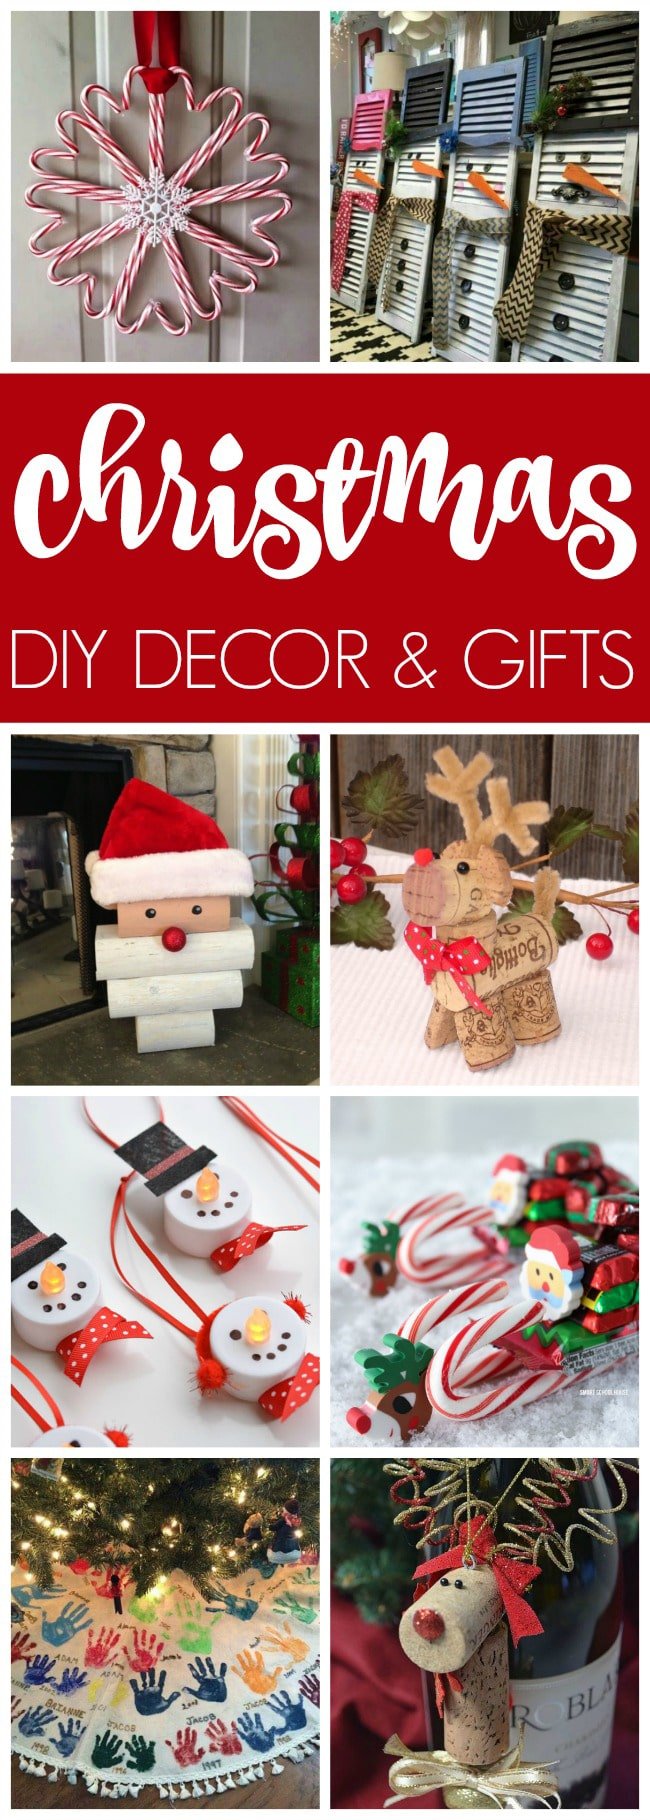 17 Epic Christmas Crafts on Pretty My Party